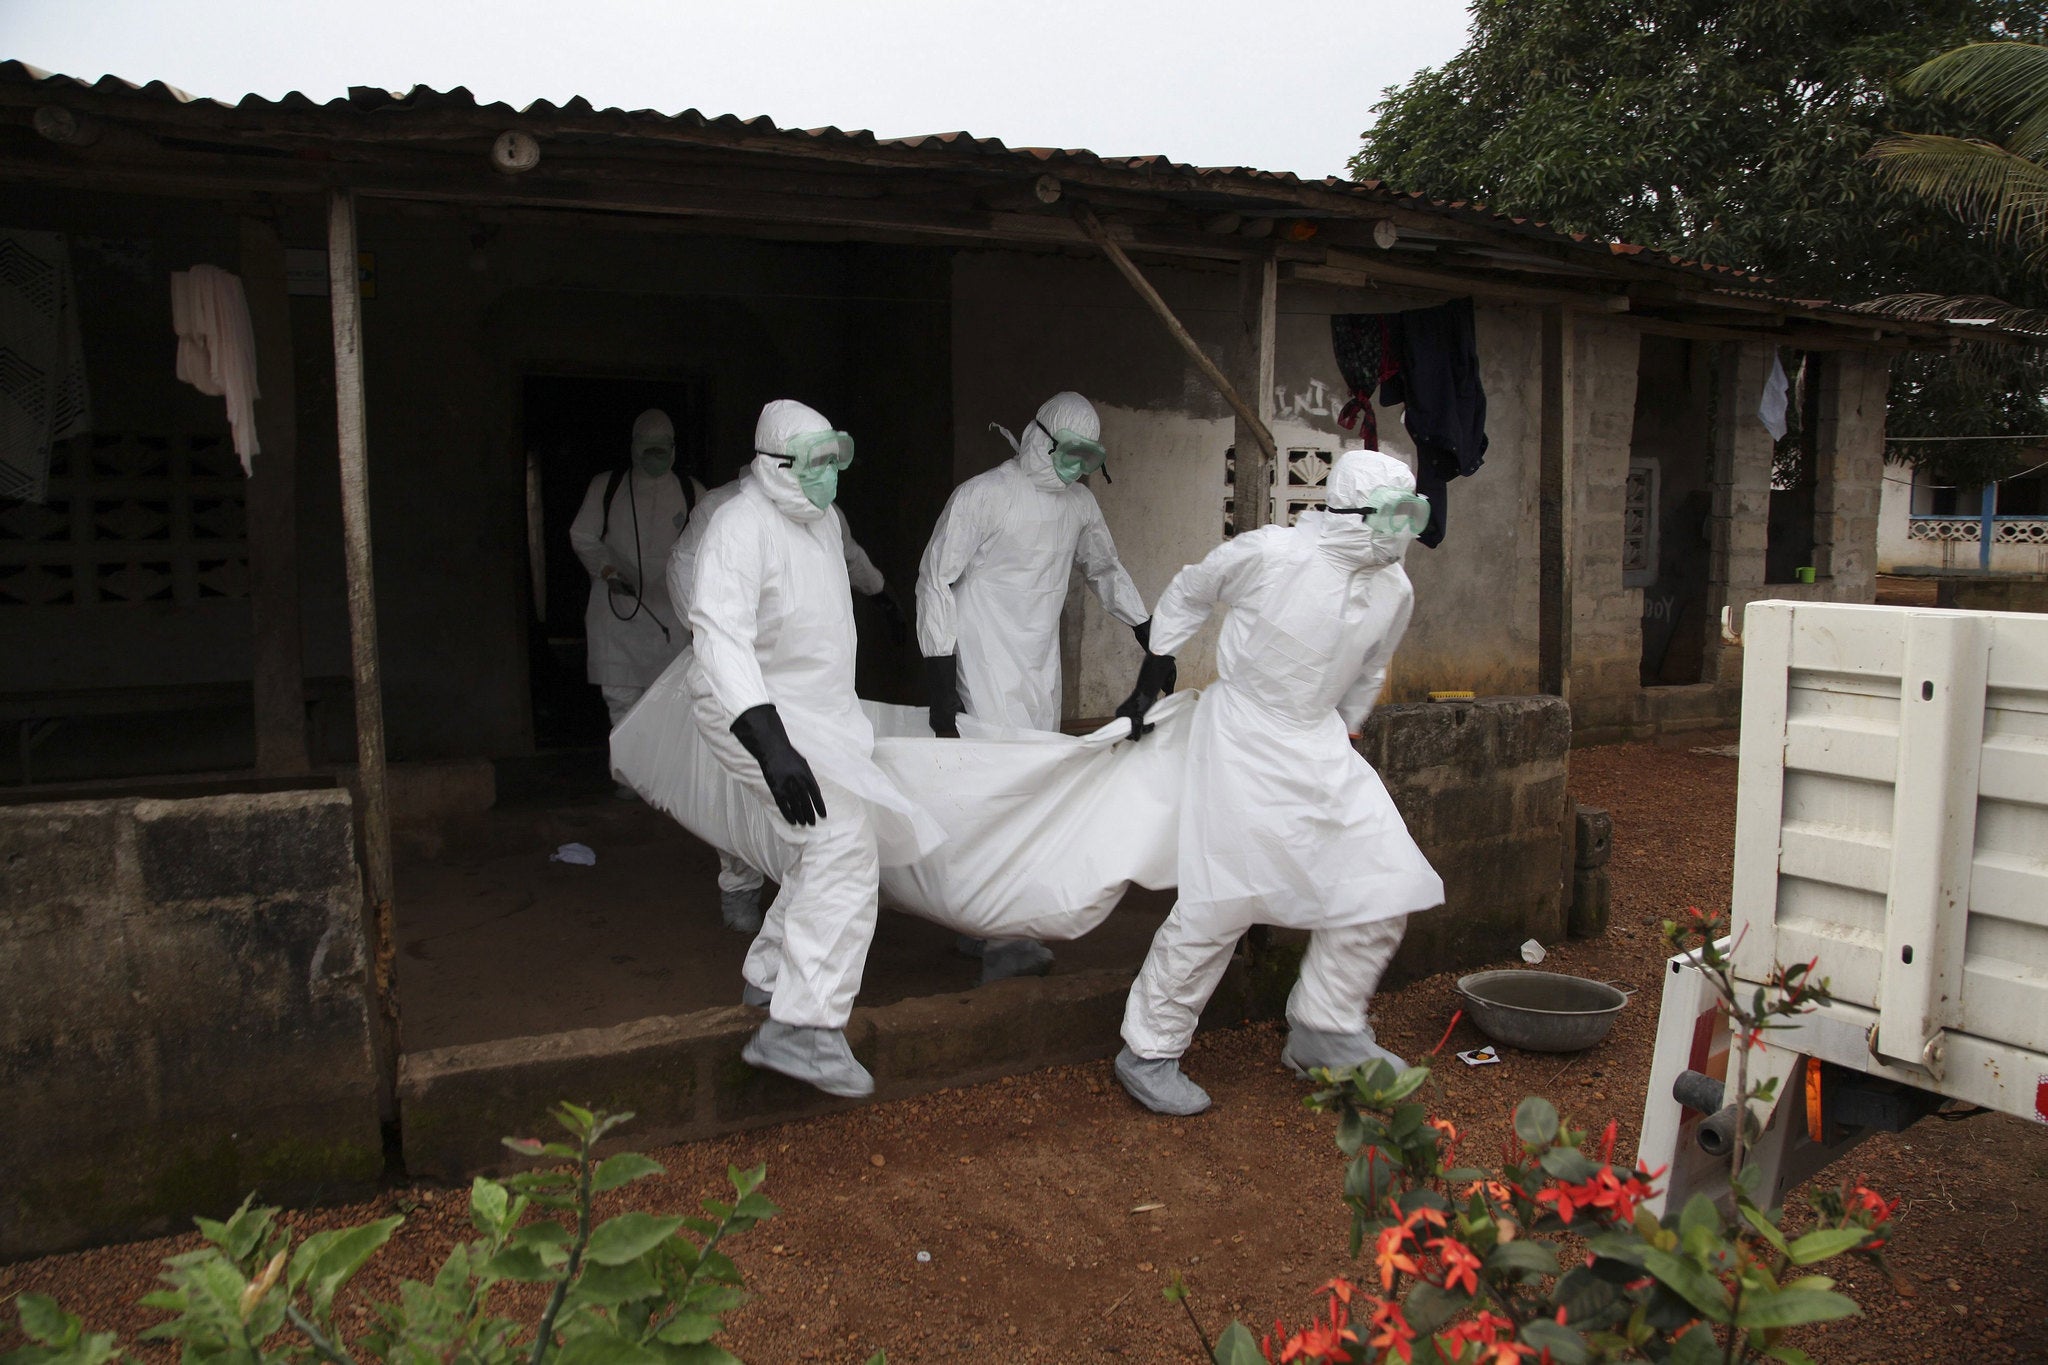 Liberian nurses carry the body of an Ebola victim from a house for burial in the Banjor Community on the outskirts of Monrovia, Liberia 6 August 2014.